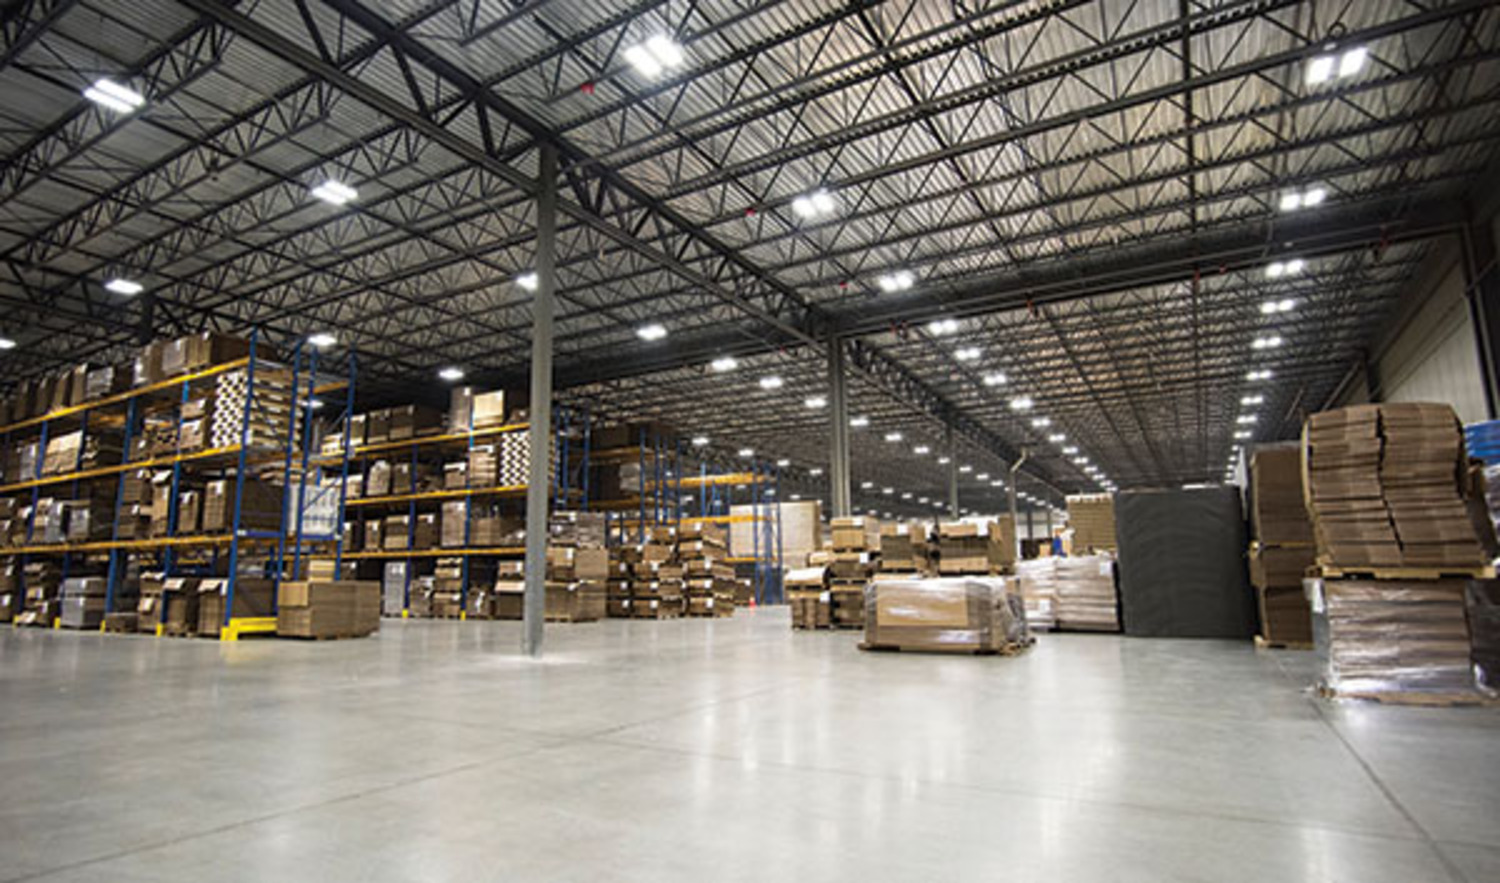 Intelligent lighting controls also are favored for warehouse applications, where they control not only lighting but can interface with inventory-management systems. Photo: Digital Lumens.